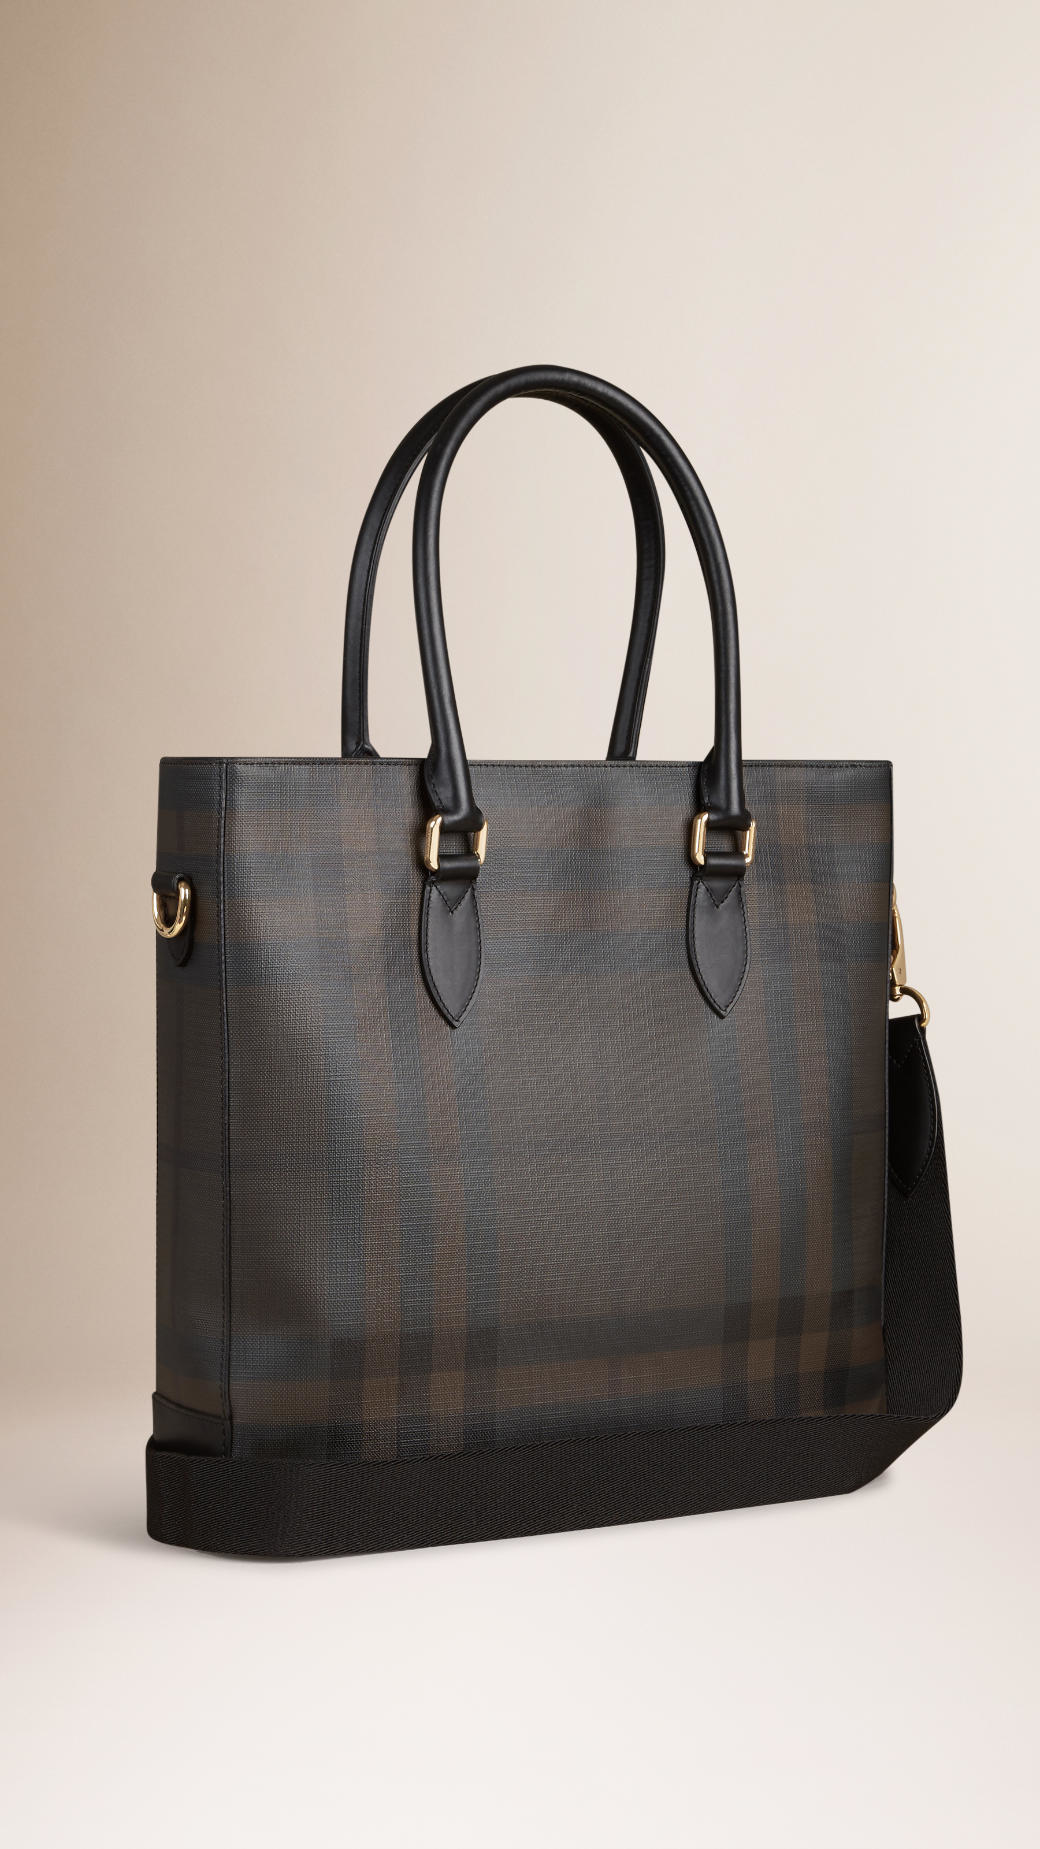 Burberry london London Check Tote Bag in Black for Men (BLACK/CHOCOLATE) | Lyst